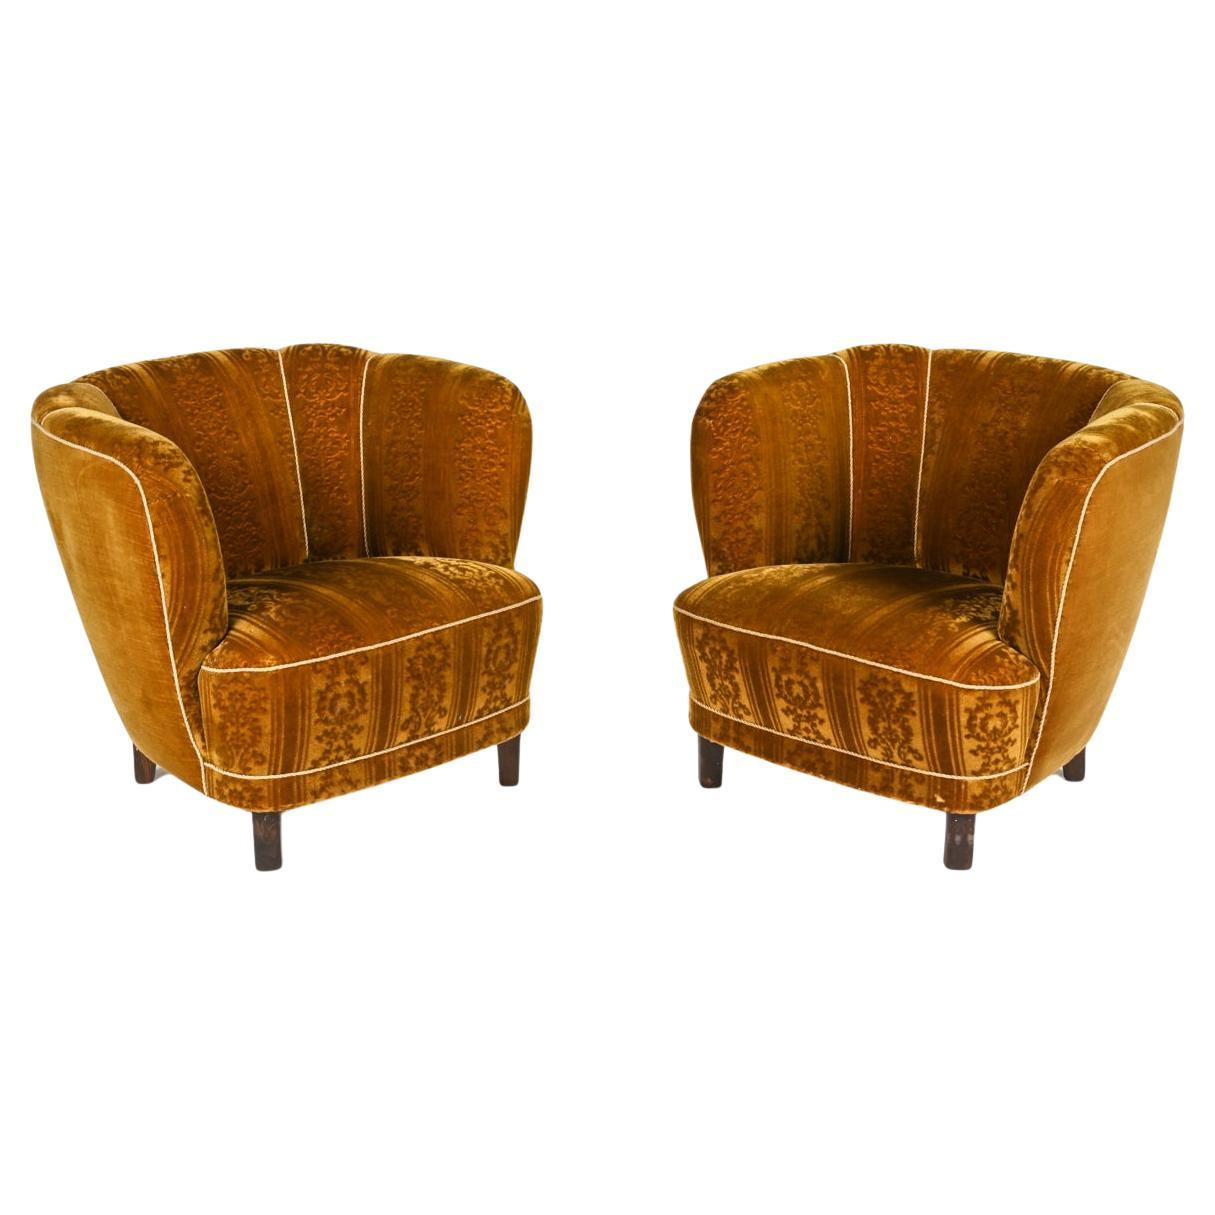 Pair of Manner of Viggo Boesen Lounge Chairs by Slagelse, c. 1940's For Sale